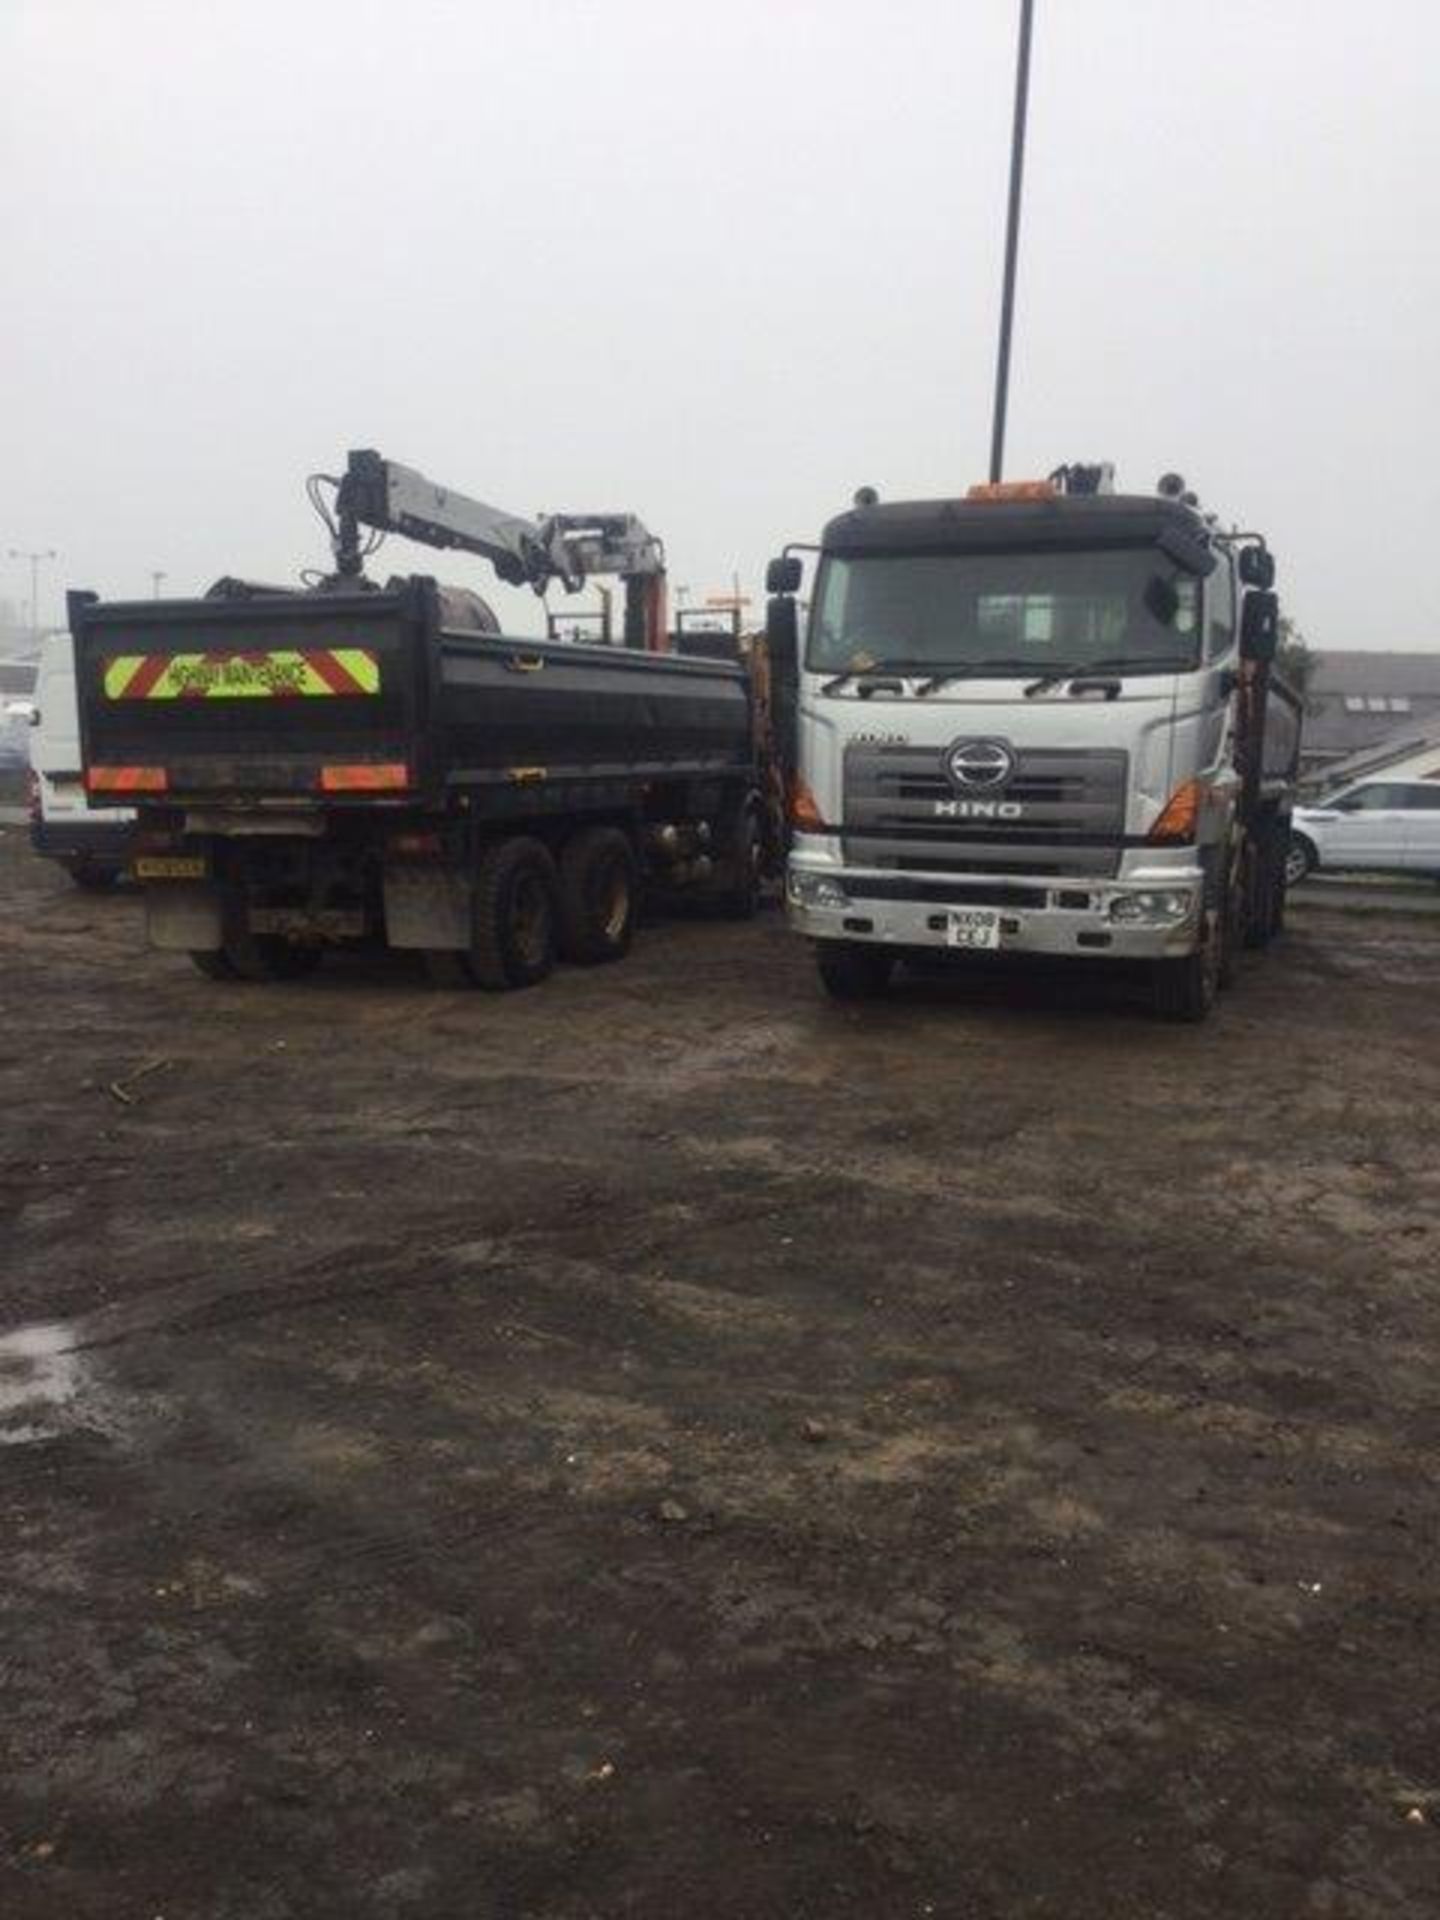 2008 HINO 700 32t 8x4 with Terex 118.2 Crane with clamshell. MOT 2017. 220,000 kilometeres approx